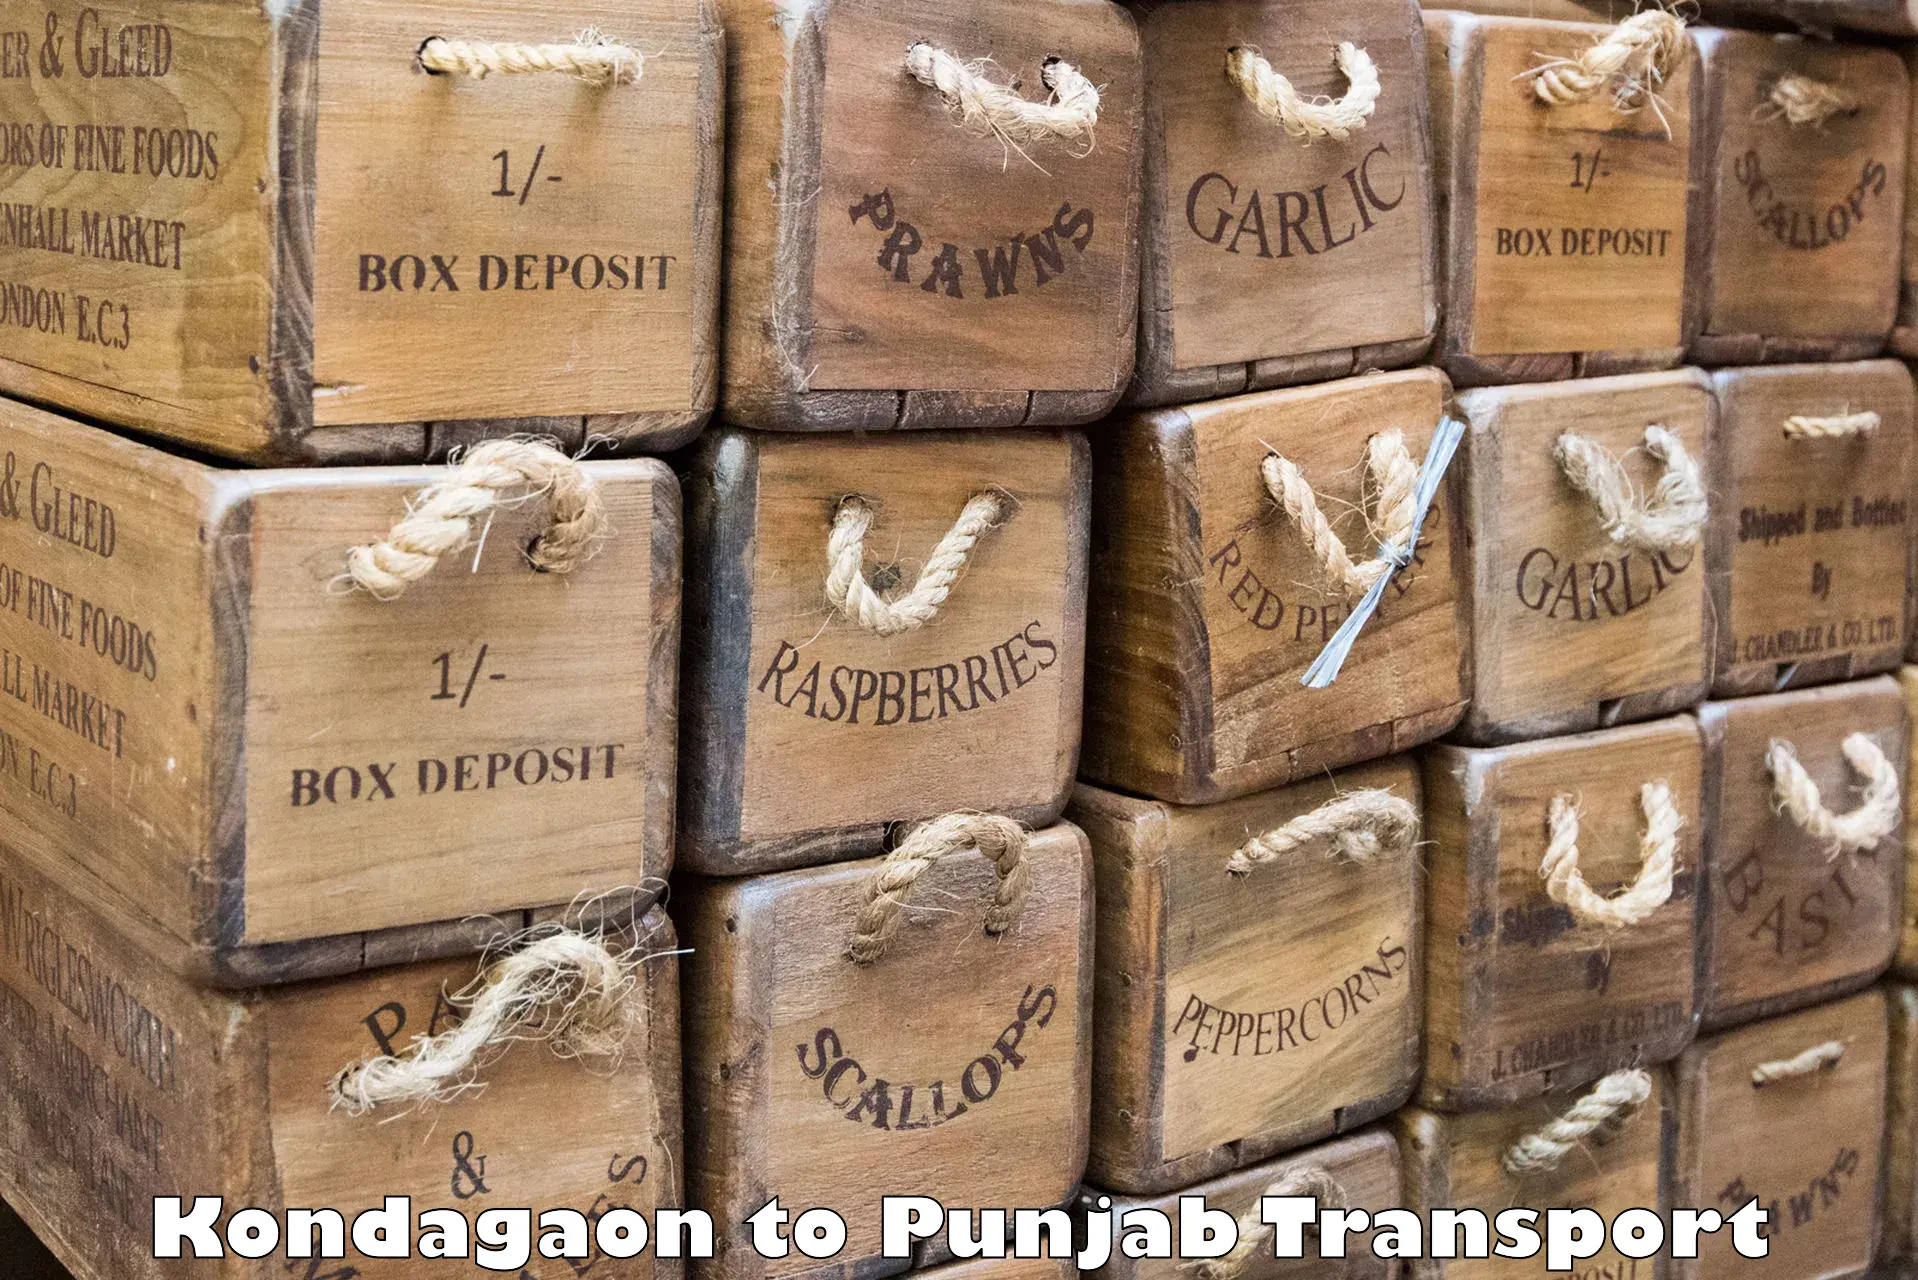 Commercial transport service Kondagaon to Sultanpur Lodhi